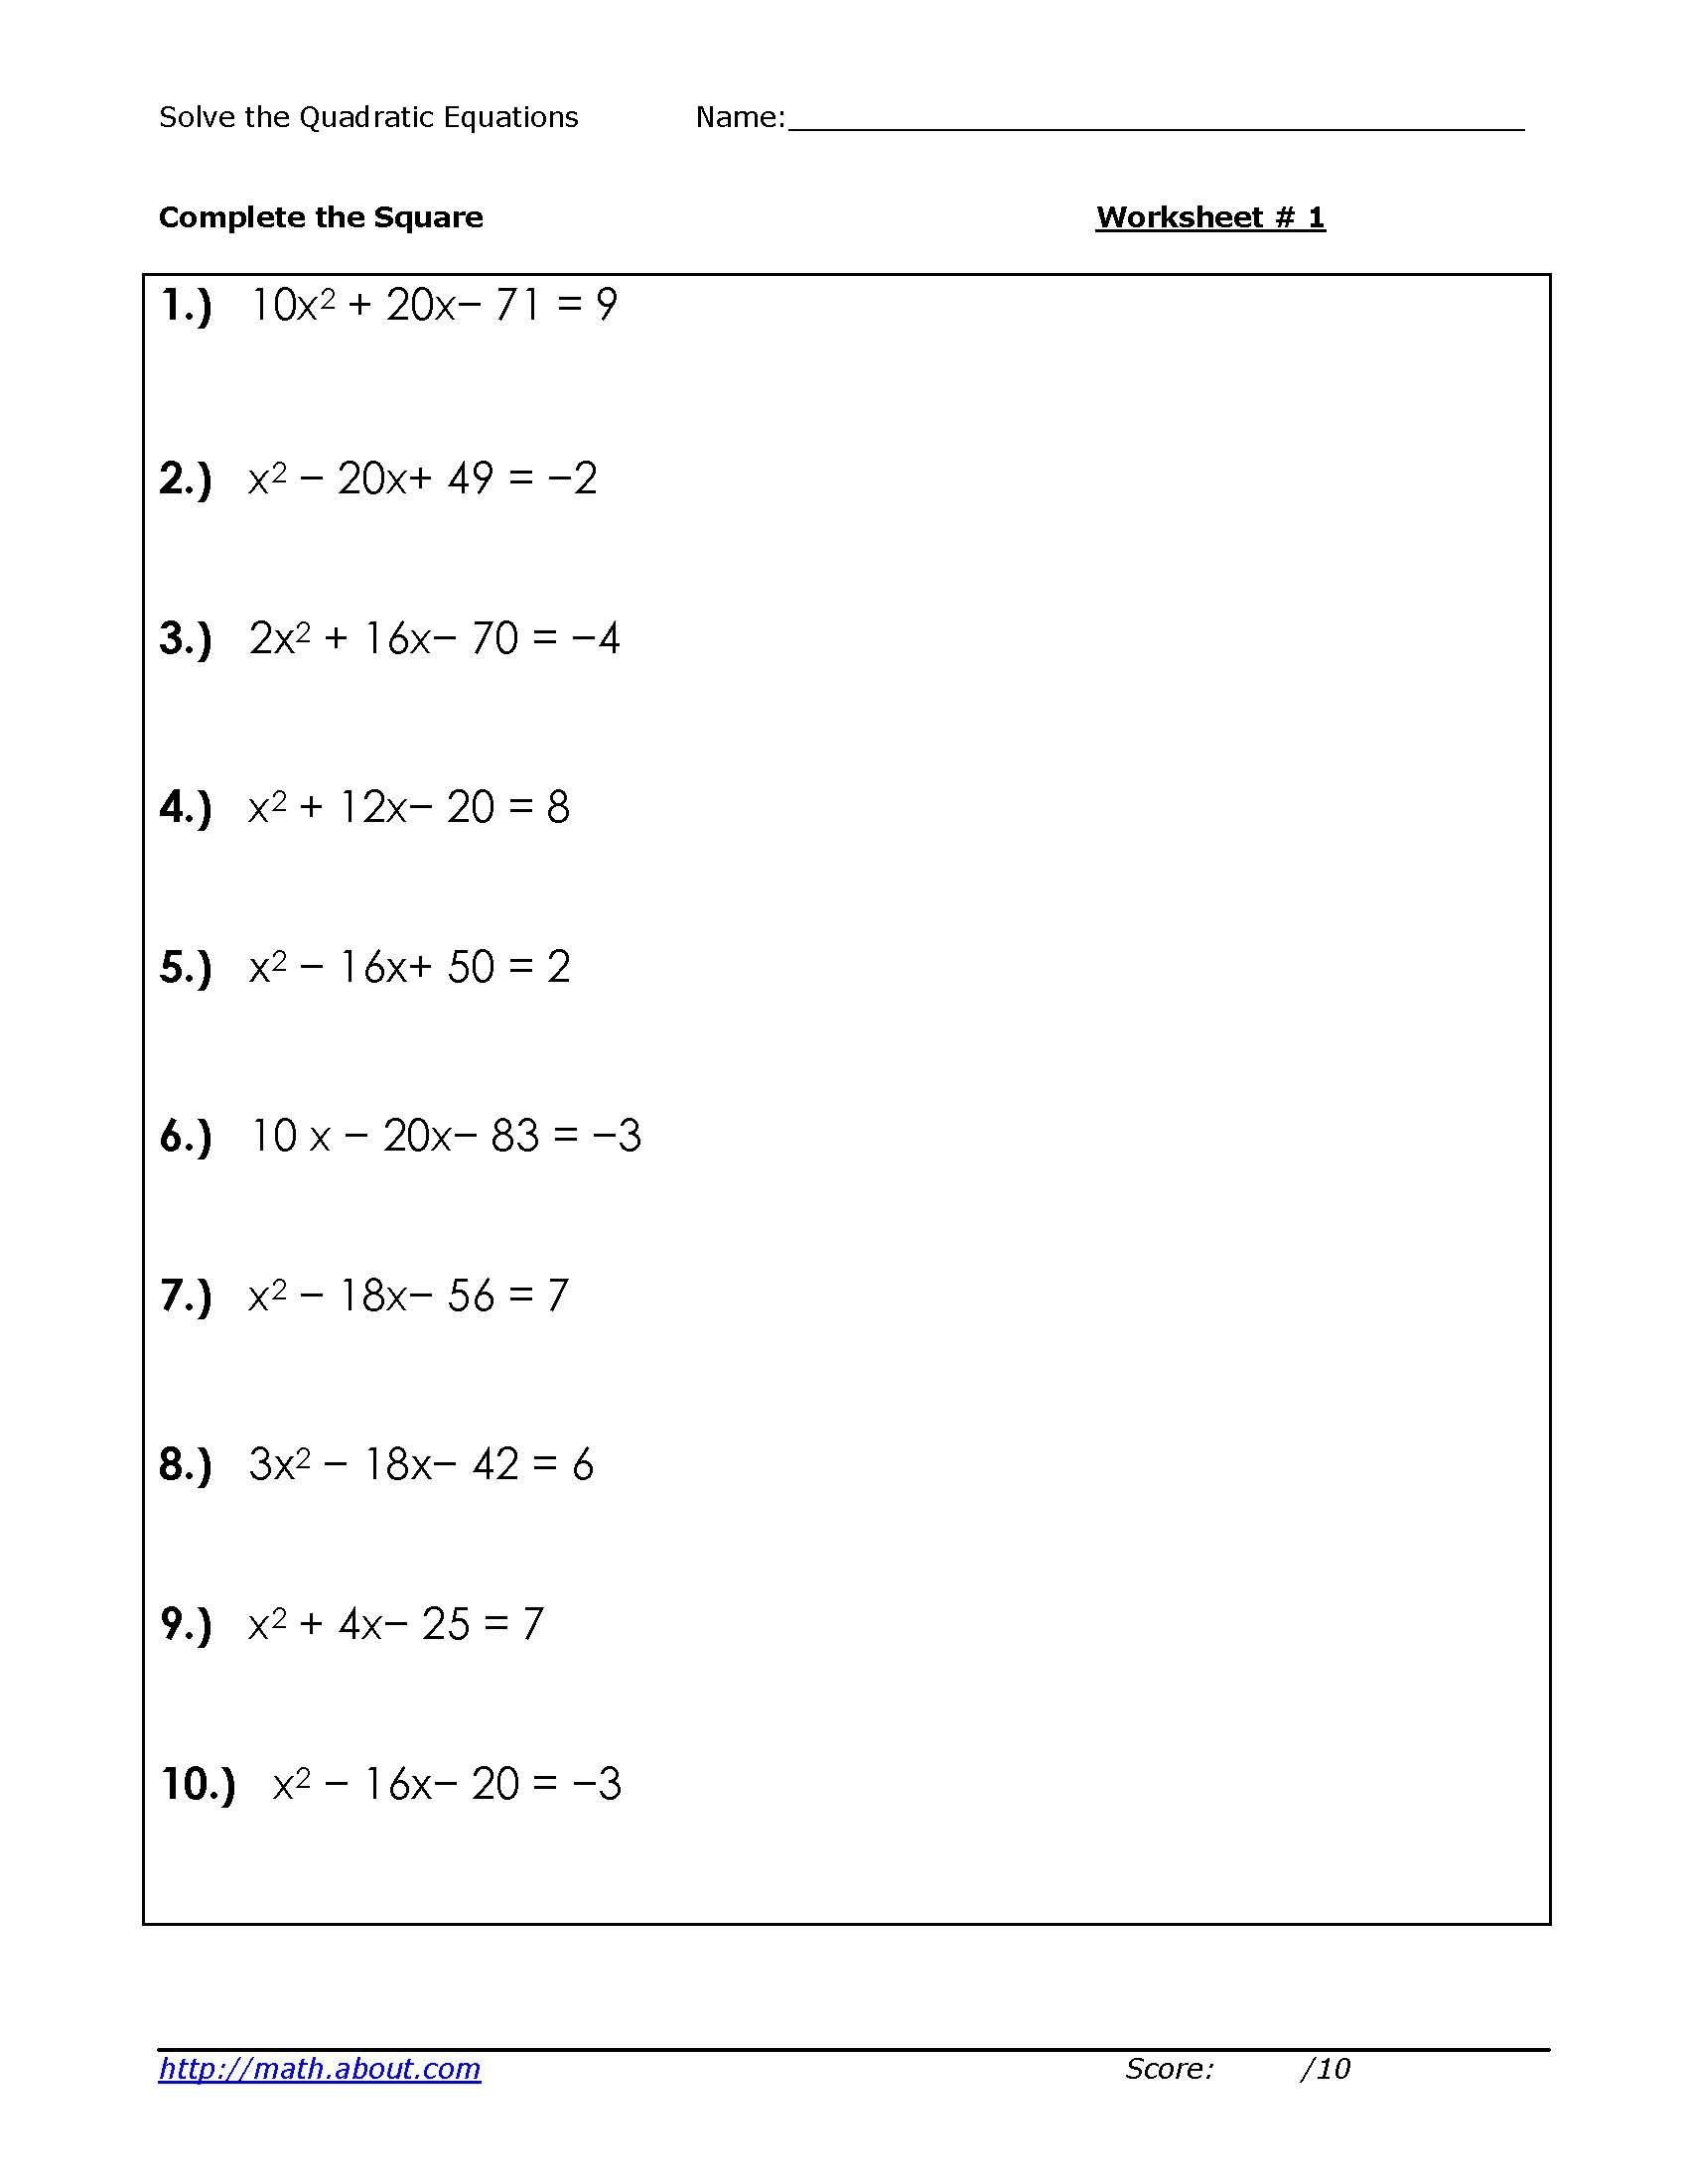 Solve Quadratic Equationscompeting The Square Worksheets And Solving Quadratic Equations By Completing The Square Worksheet